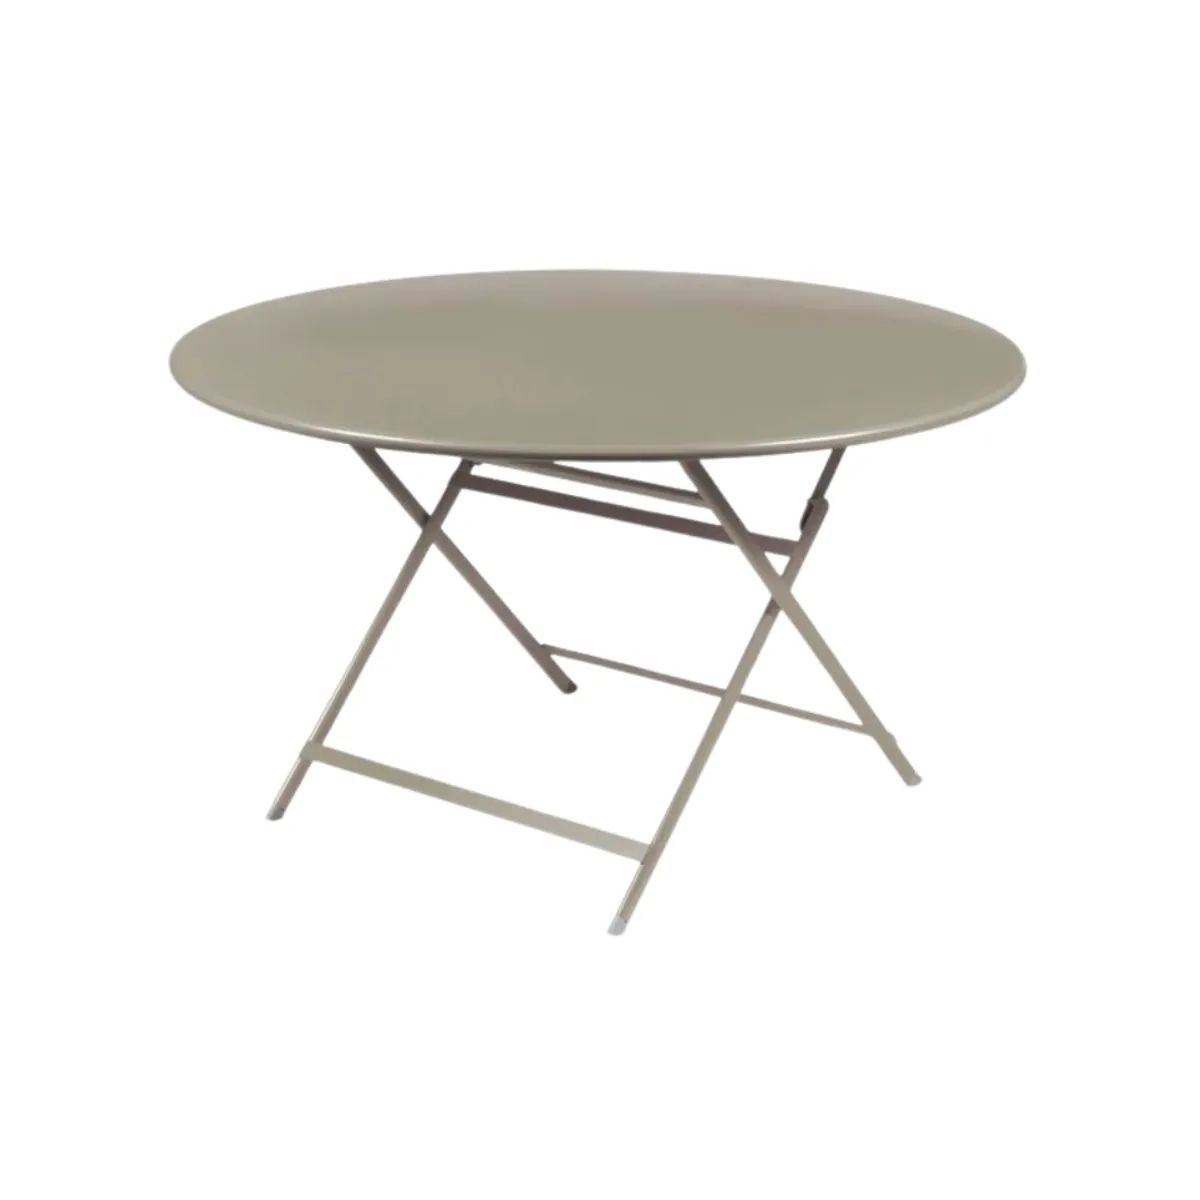 Caractere round folding table 2